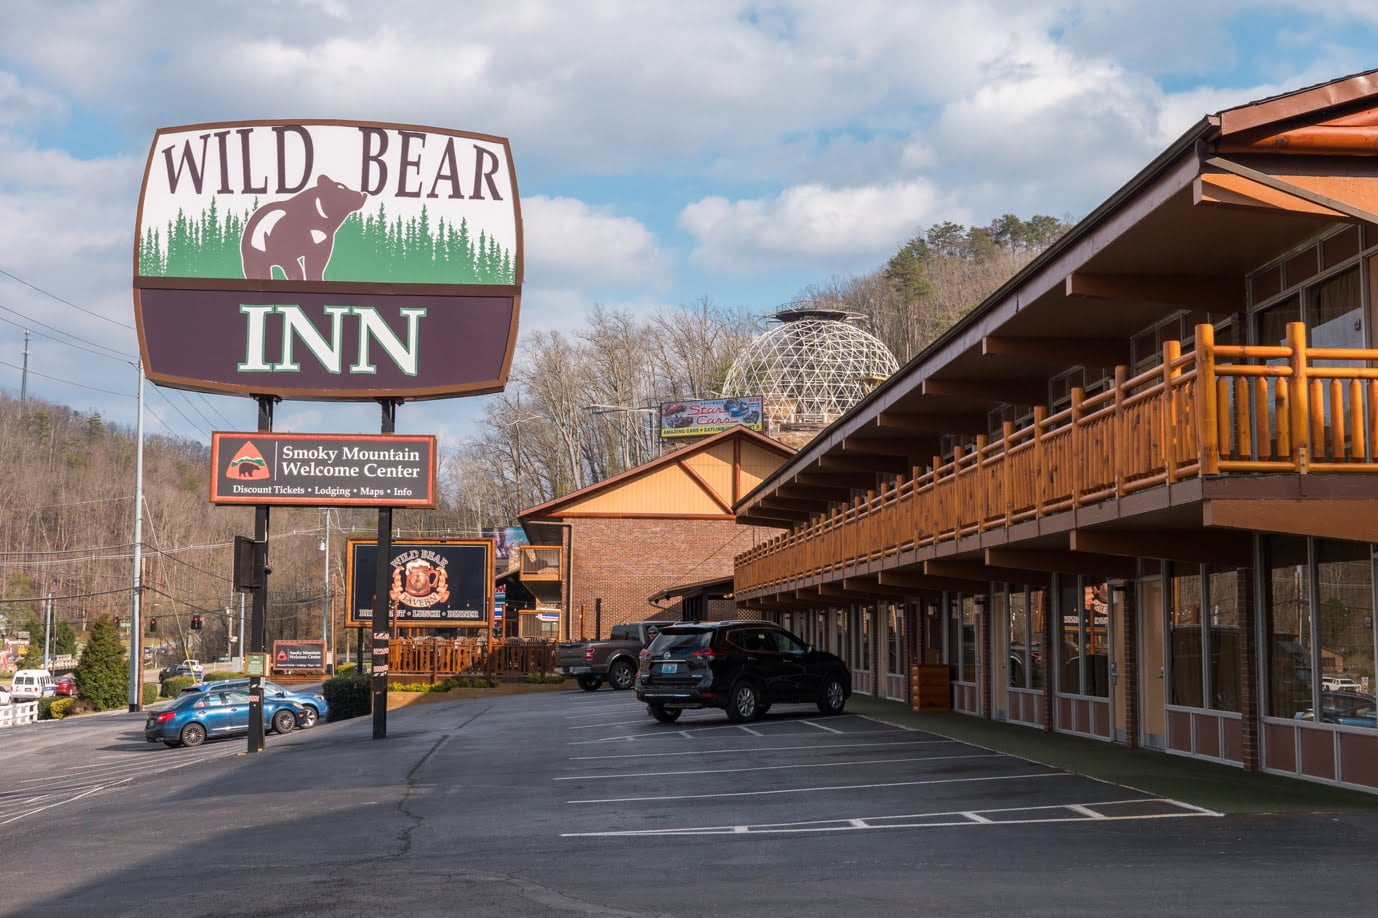 May be an image of road and text that says "WILD WILDBEAR BEAR INN Smoky Mountain Welcome Center Ûsoun"